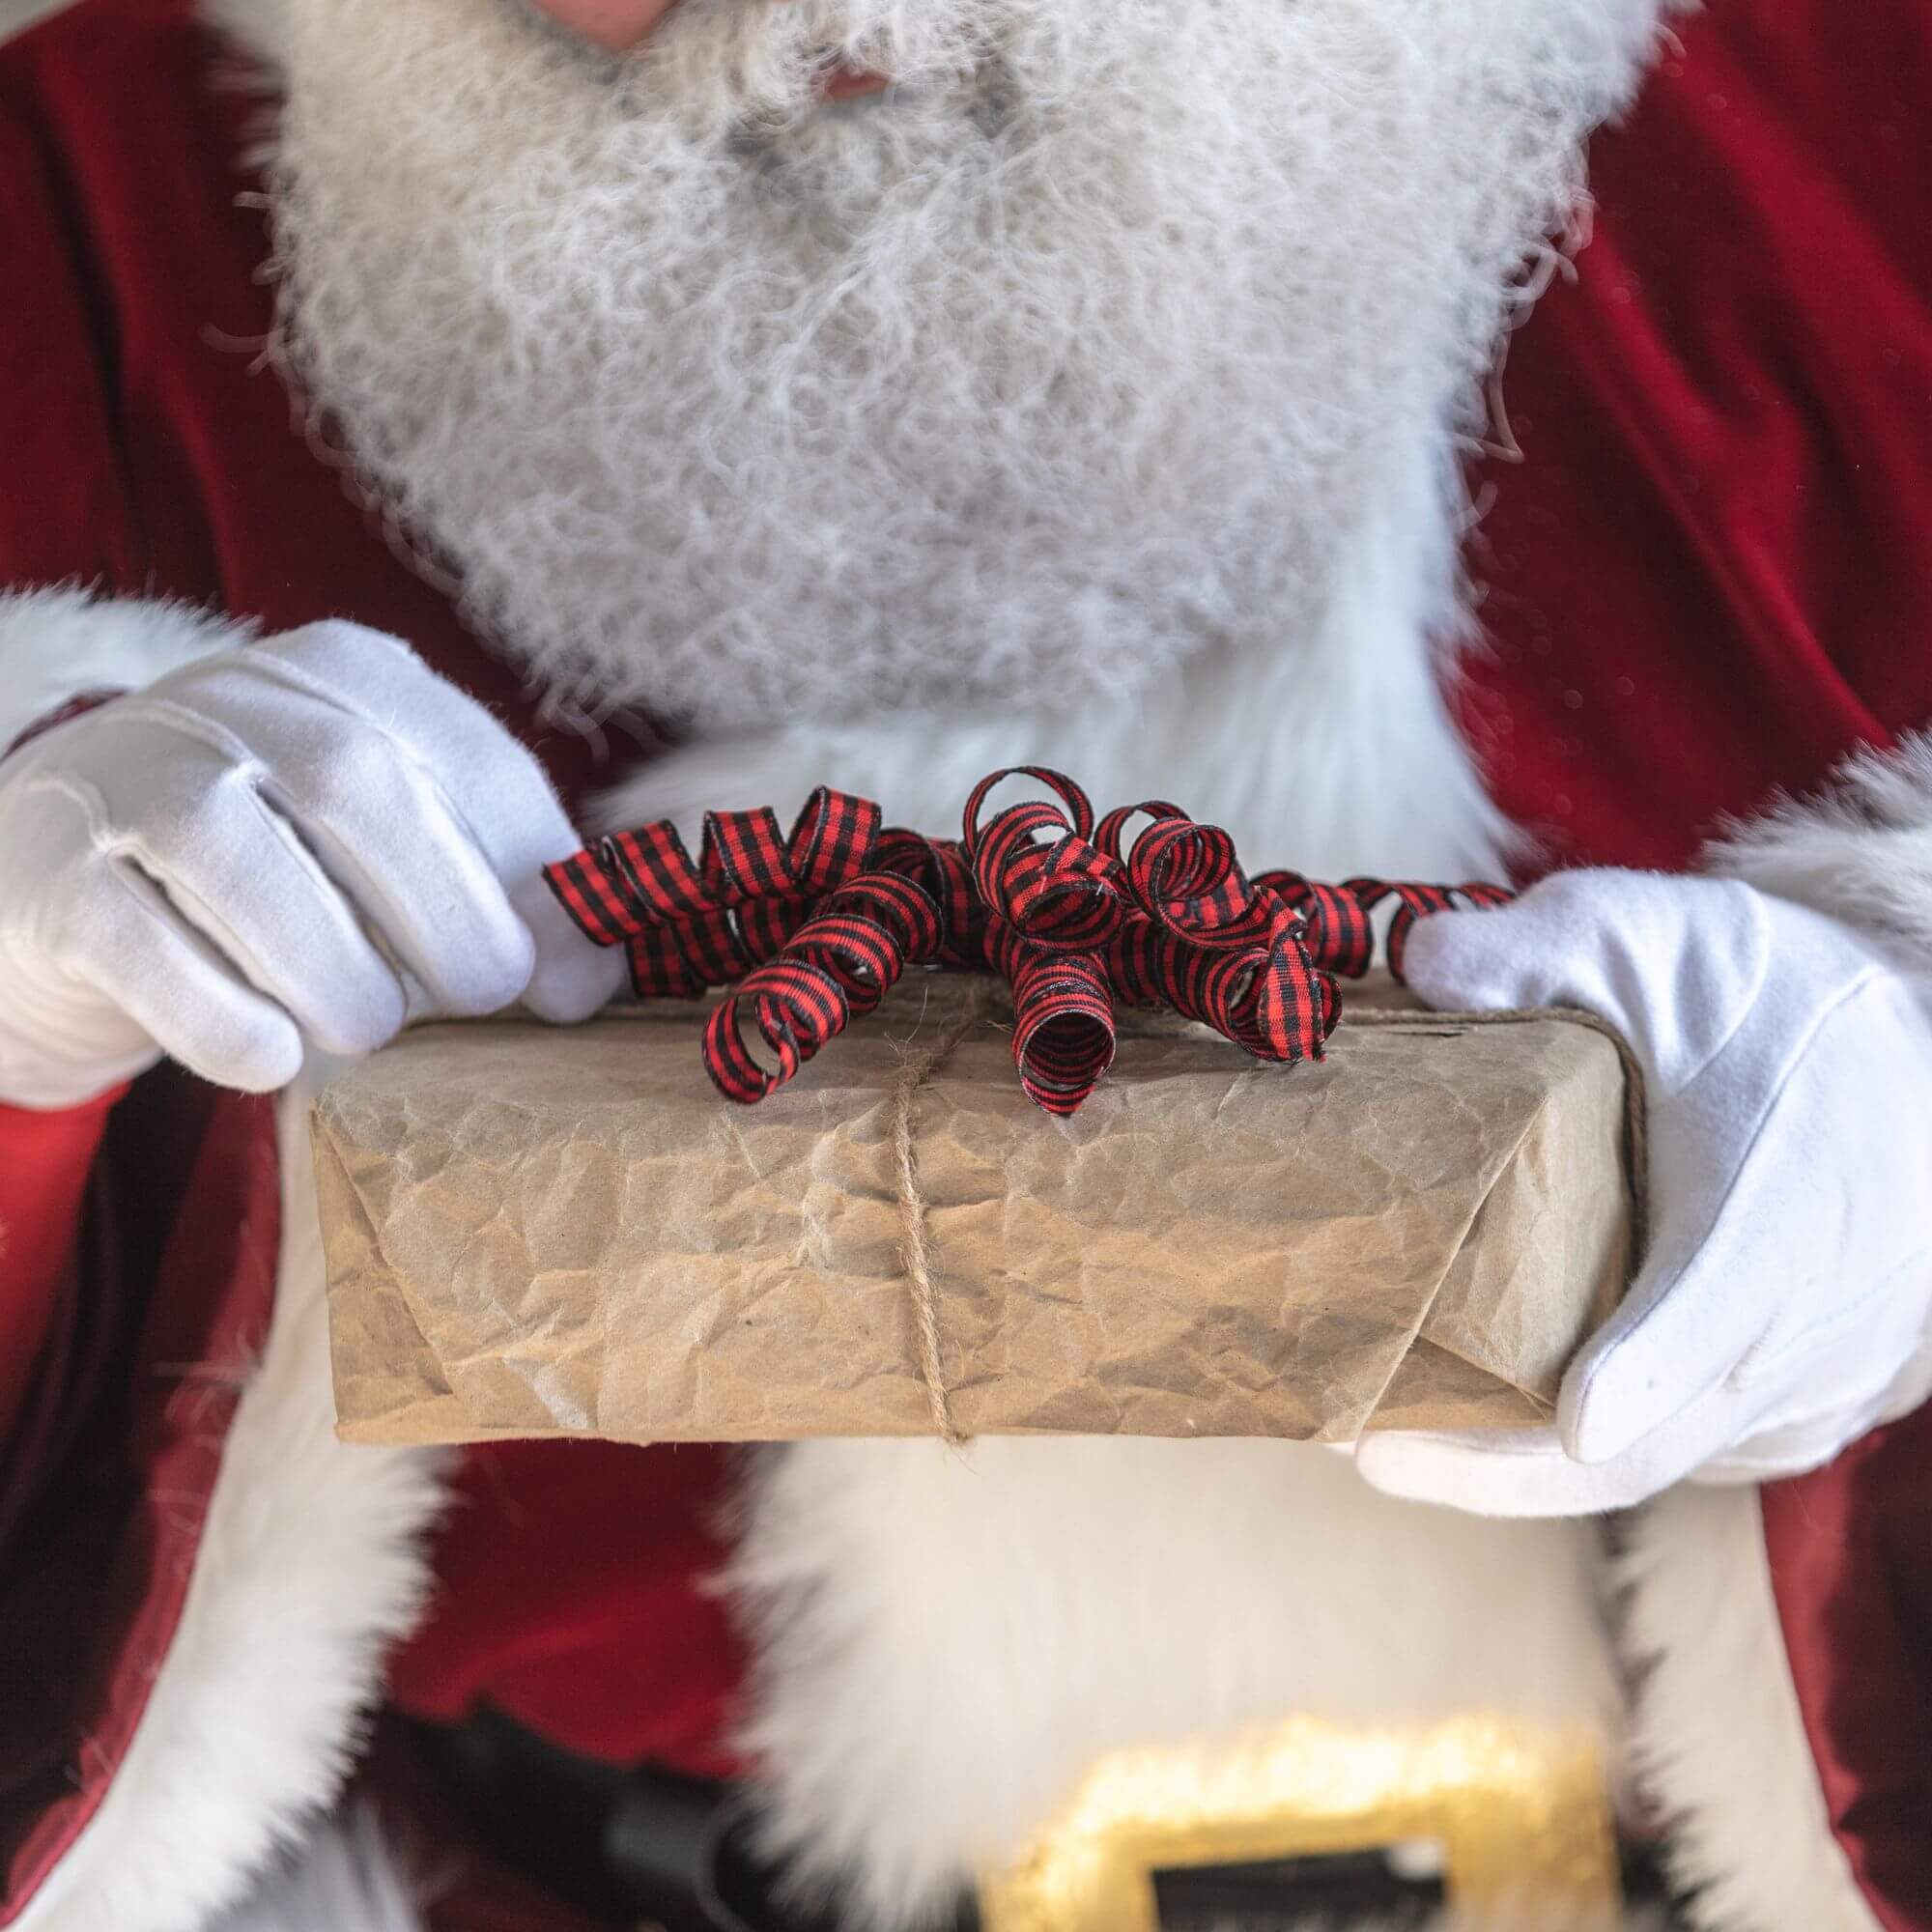 A man in a Santa suit unwrapping a Christmas present wrapped in brown paper and a red ribbon.